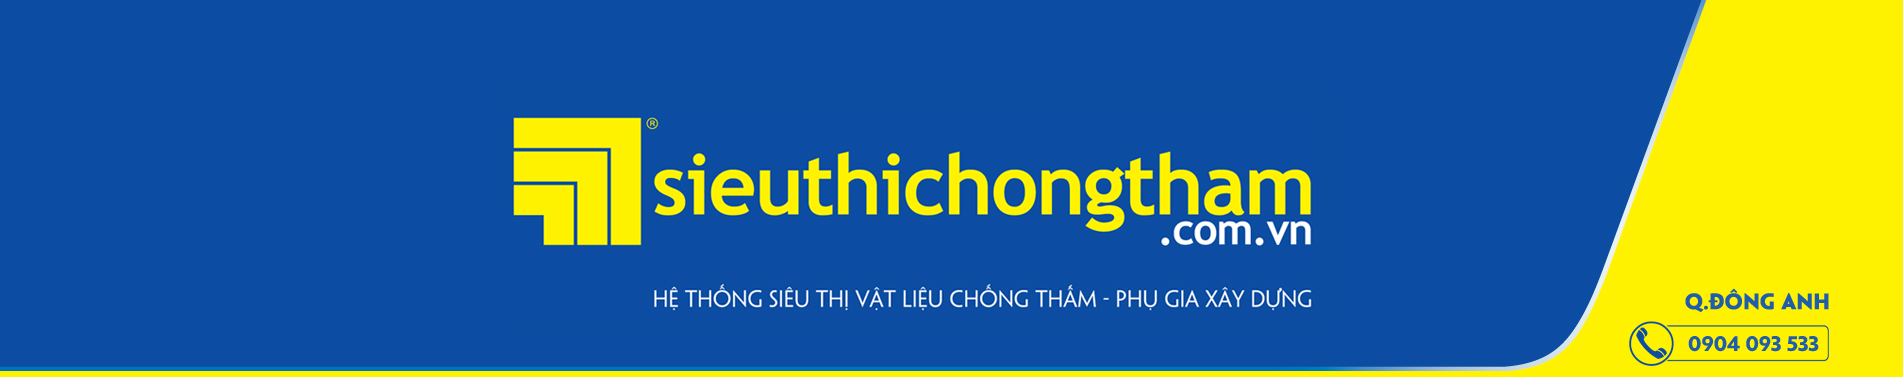 Dong Anh Banner 1